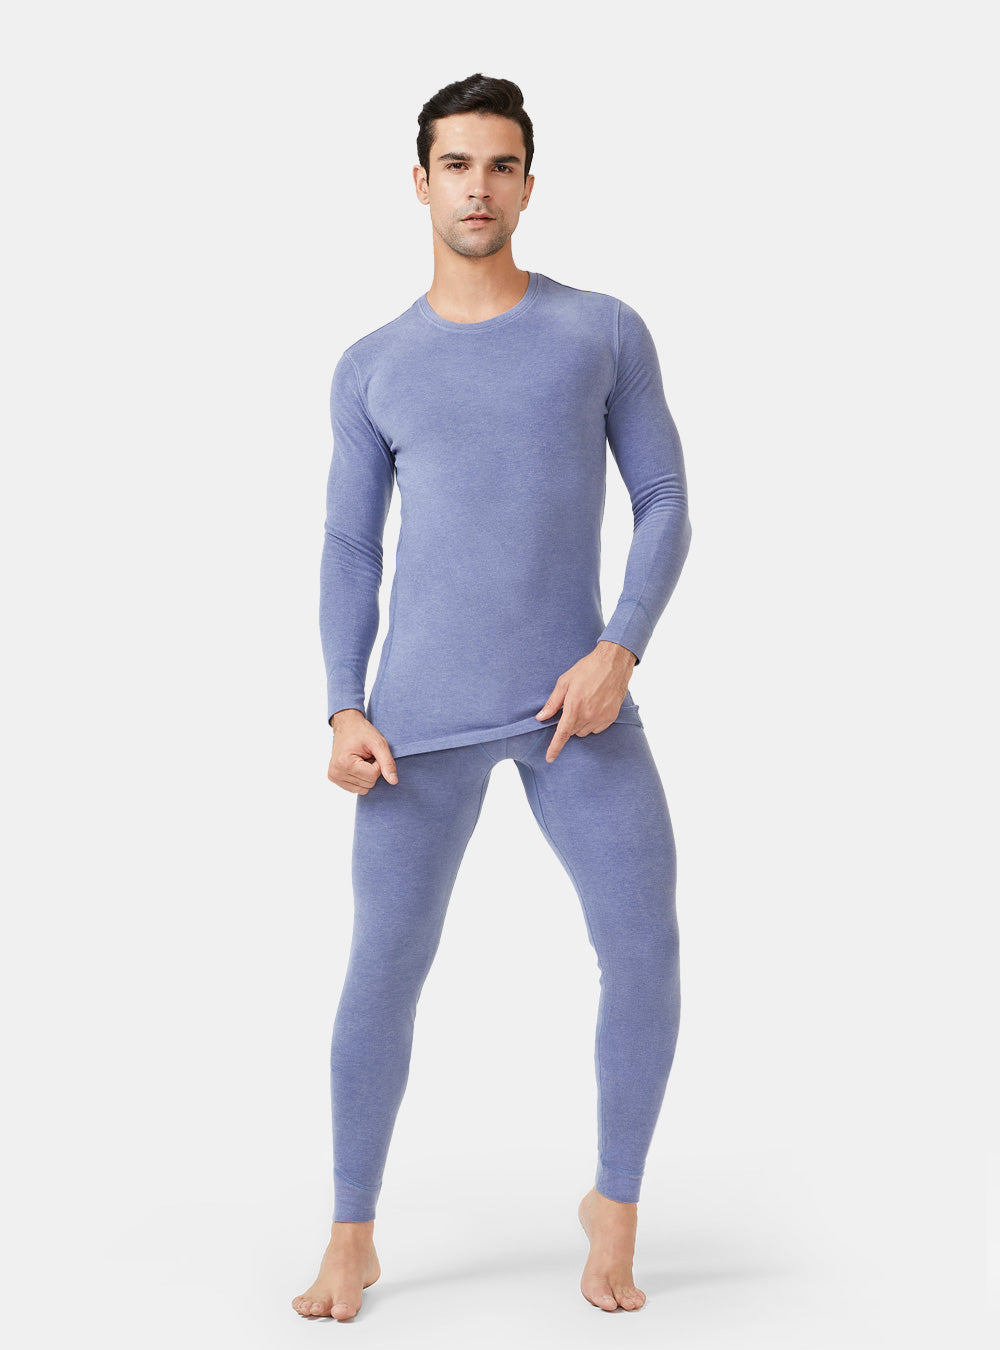 Men's Thermal Long Johns Bottoms – Day2Day Wear